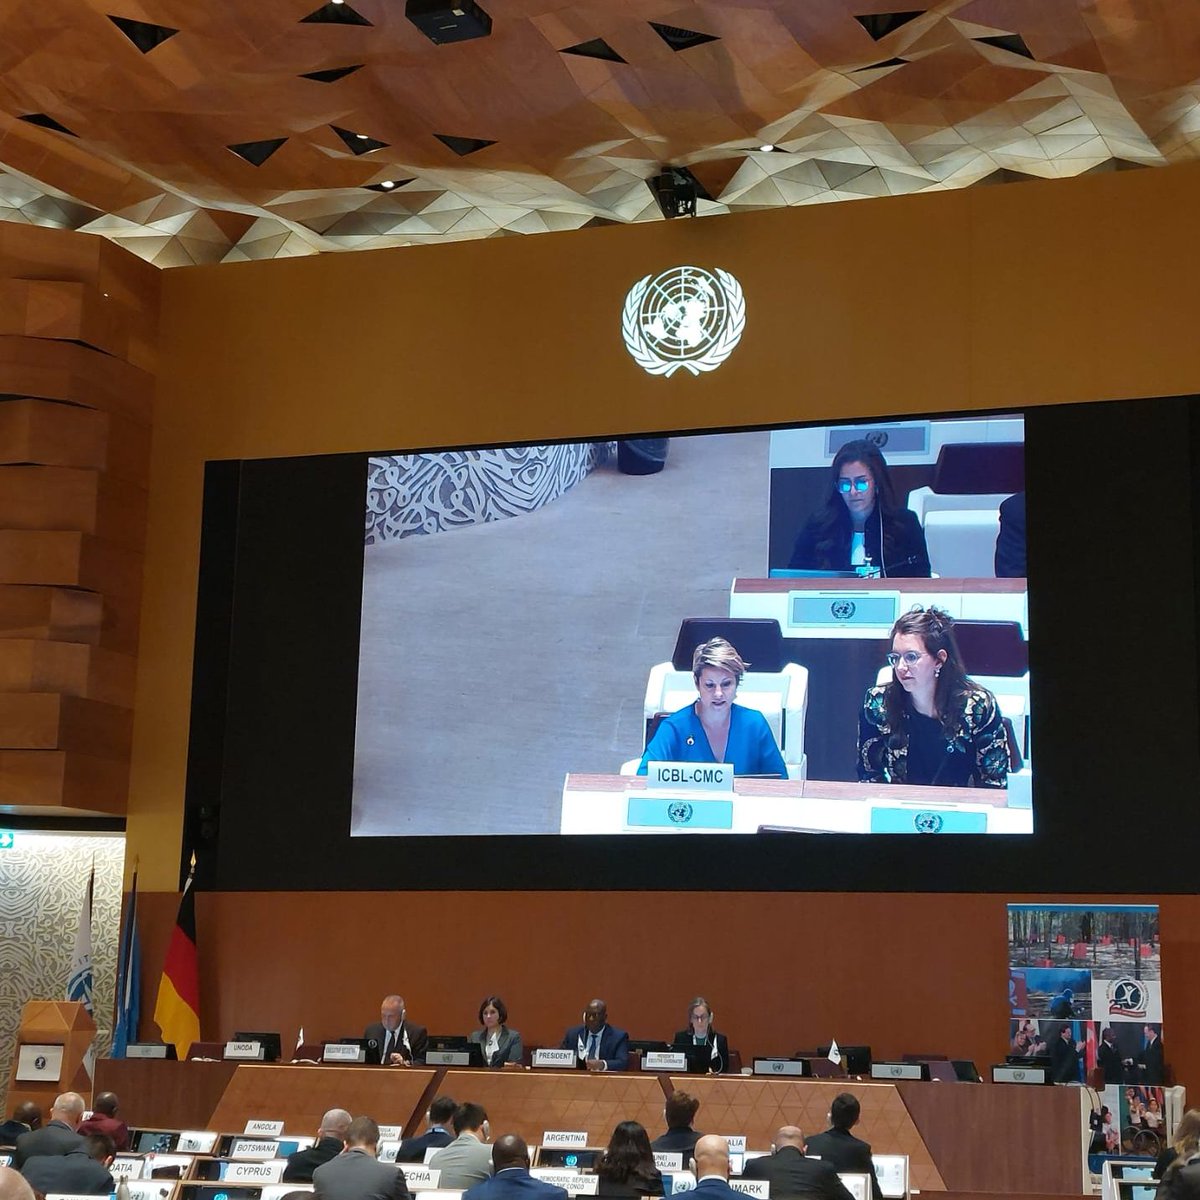 'It is key that the mine action sector puts a focus on how to deliver #sustainable and impact-focused #RiskEducation, through enhanced national ownership' - Ms. Mathilde Savini @MineBanTreaty #21MSP @HI_Advocacy